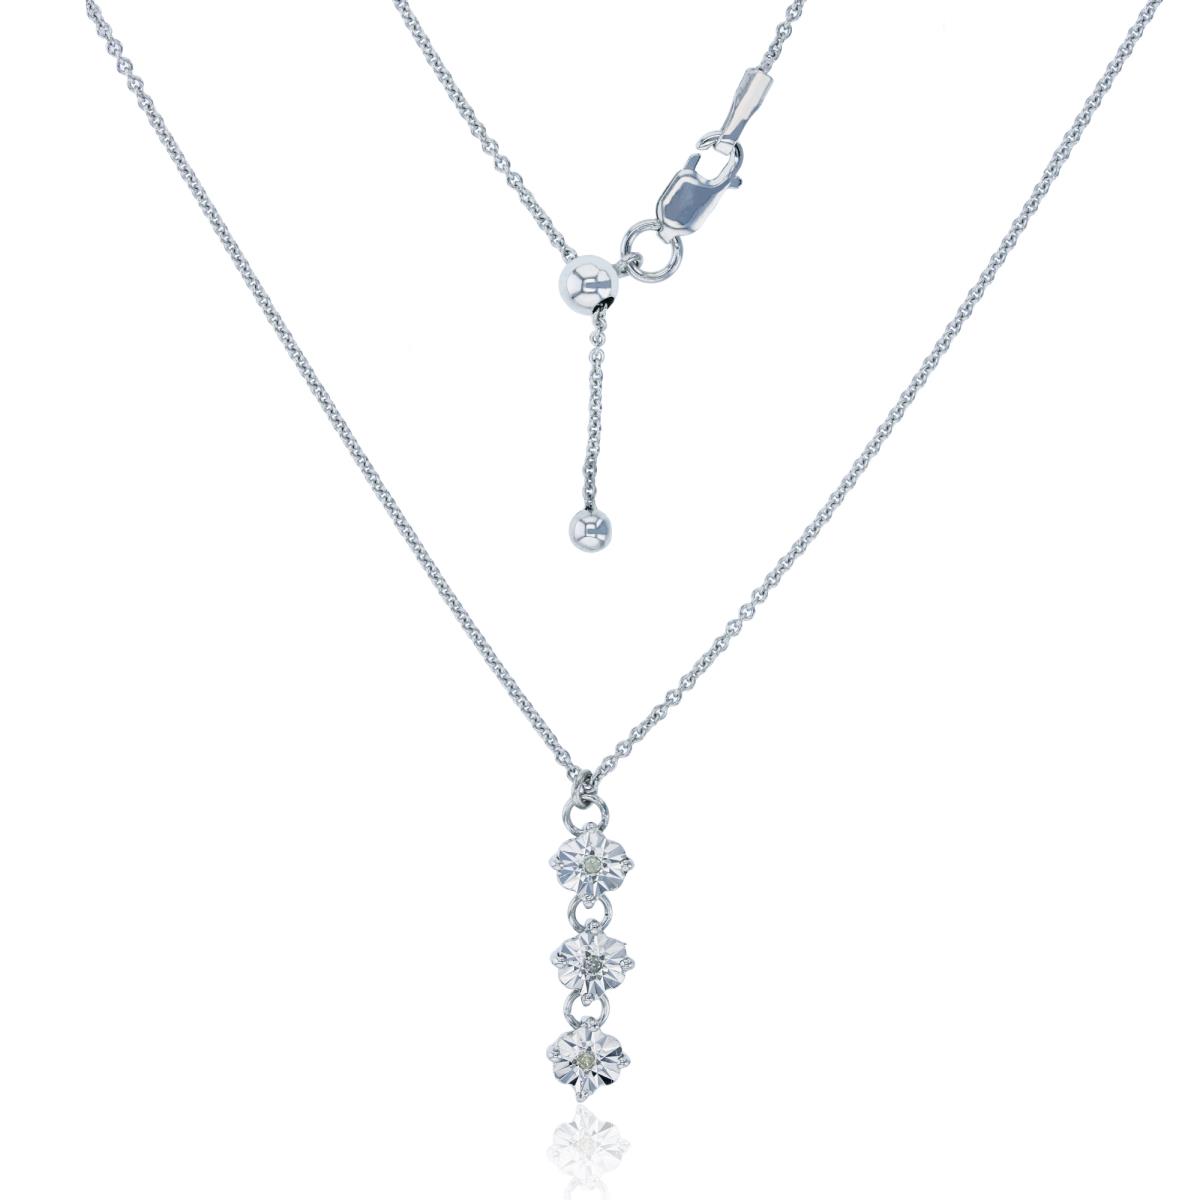 Sterling Silver Rhodium 0.5pt Diamond Accent 22" Dangling DC Flowers Adjustable Necklace